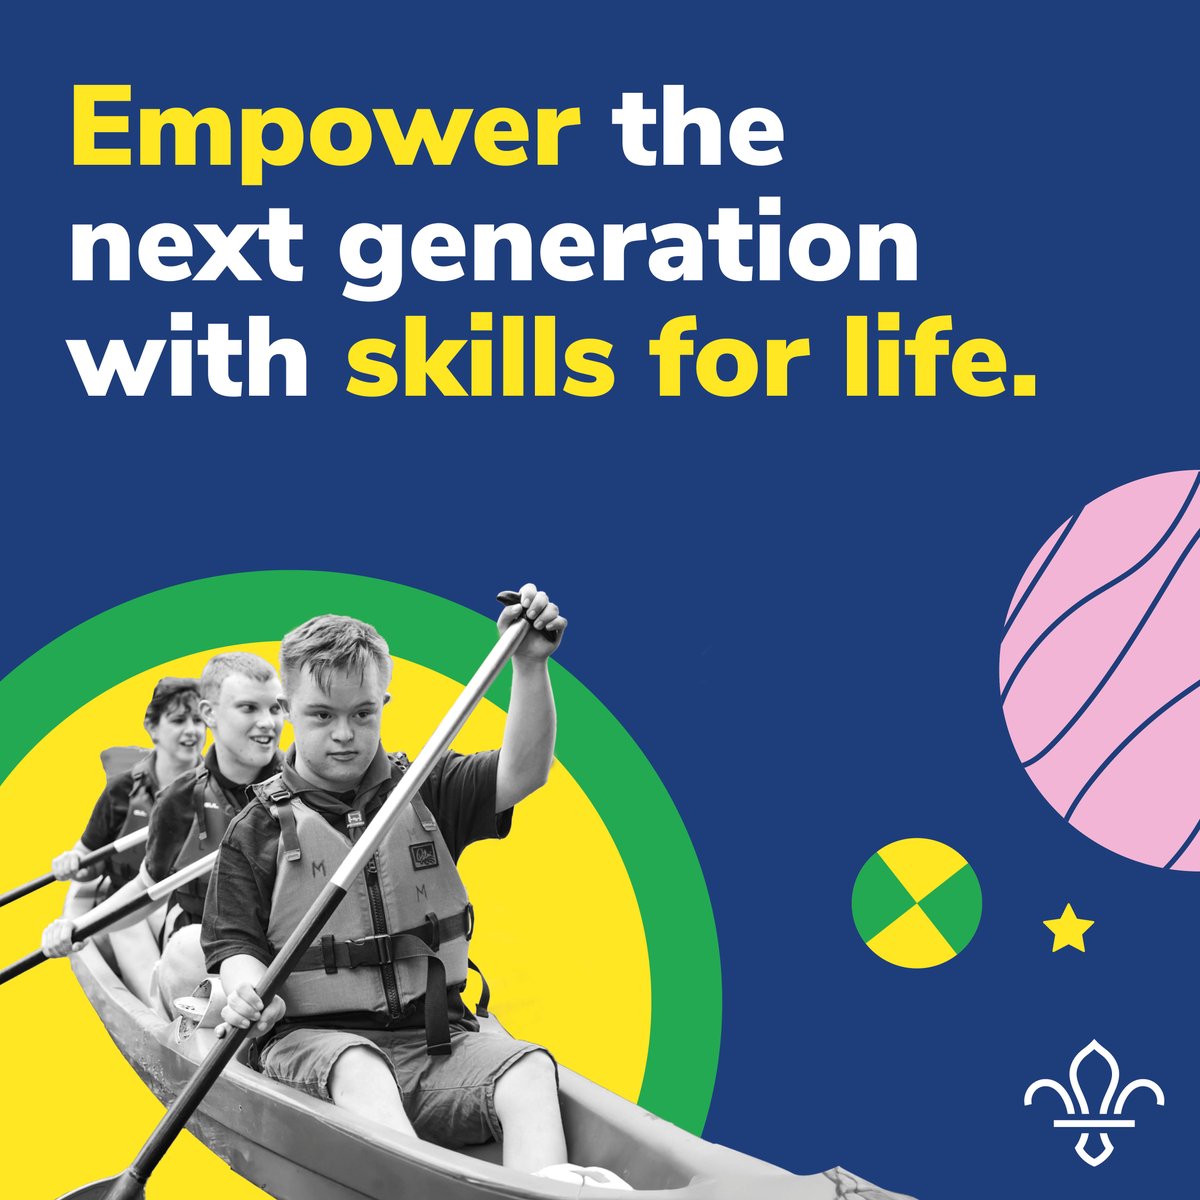 We support the #ScoutsManifesto! 🙌 Let's ensure that essential skills learned outside the classroom are recognised and accessible to every young person. Find out more here: scouts.org.uk/Manifesto @scouts #BuildingBrighterTomorrows